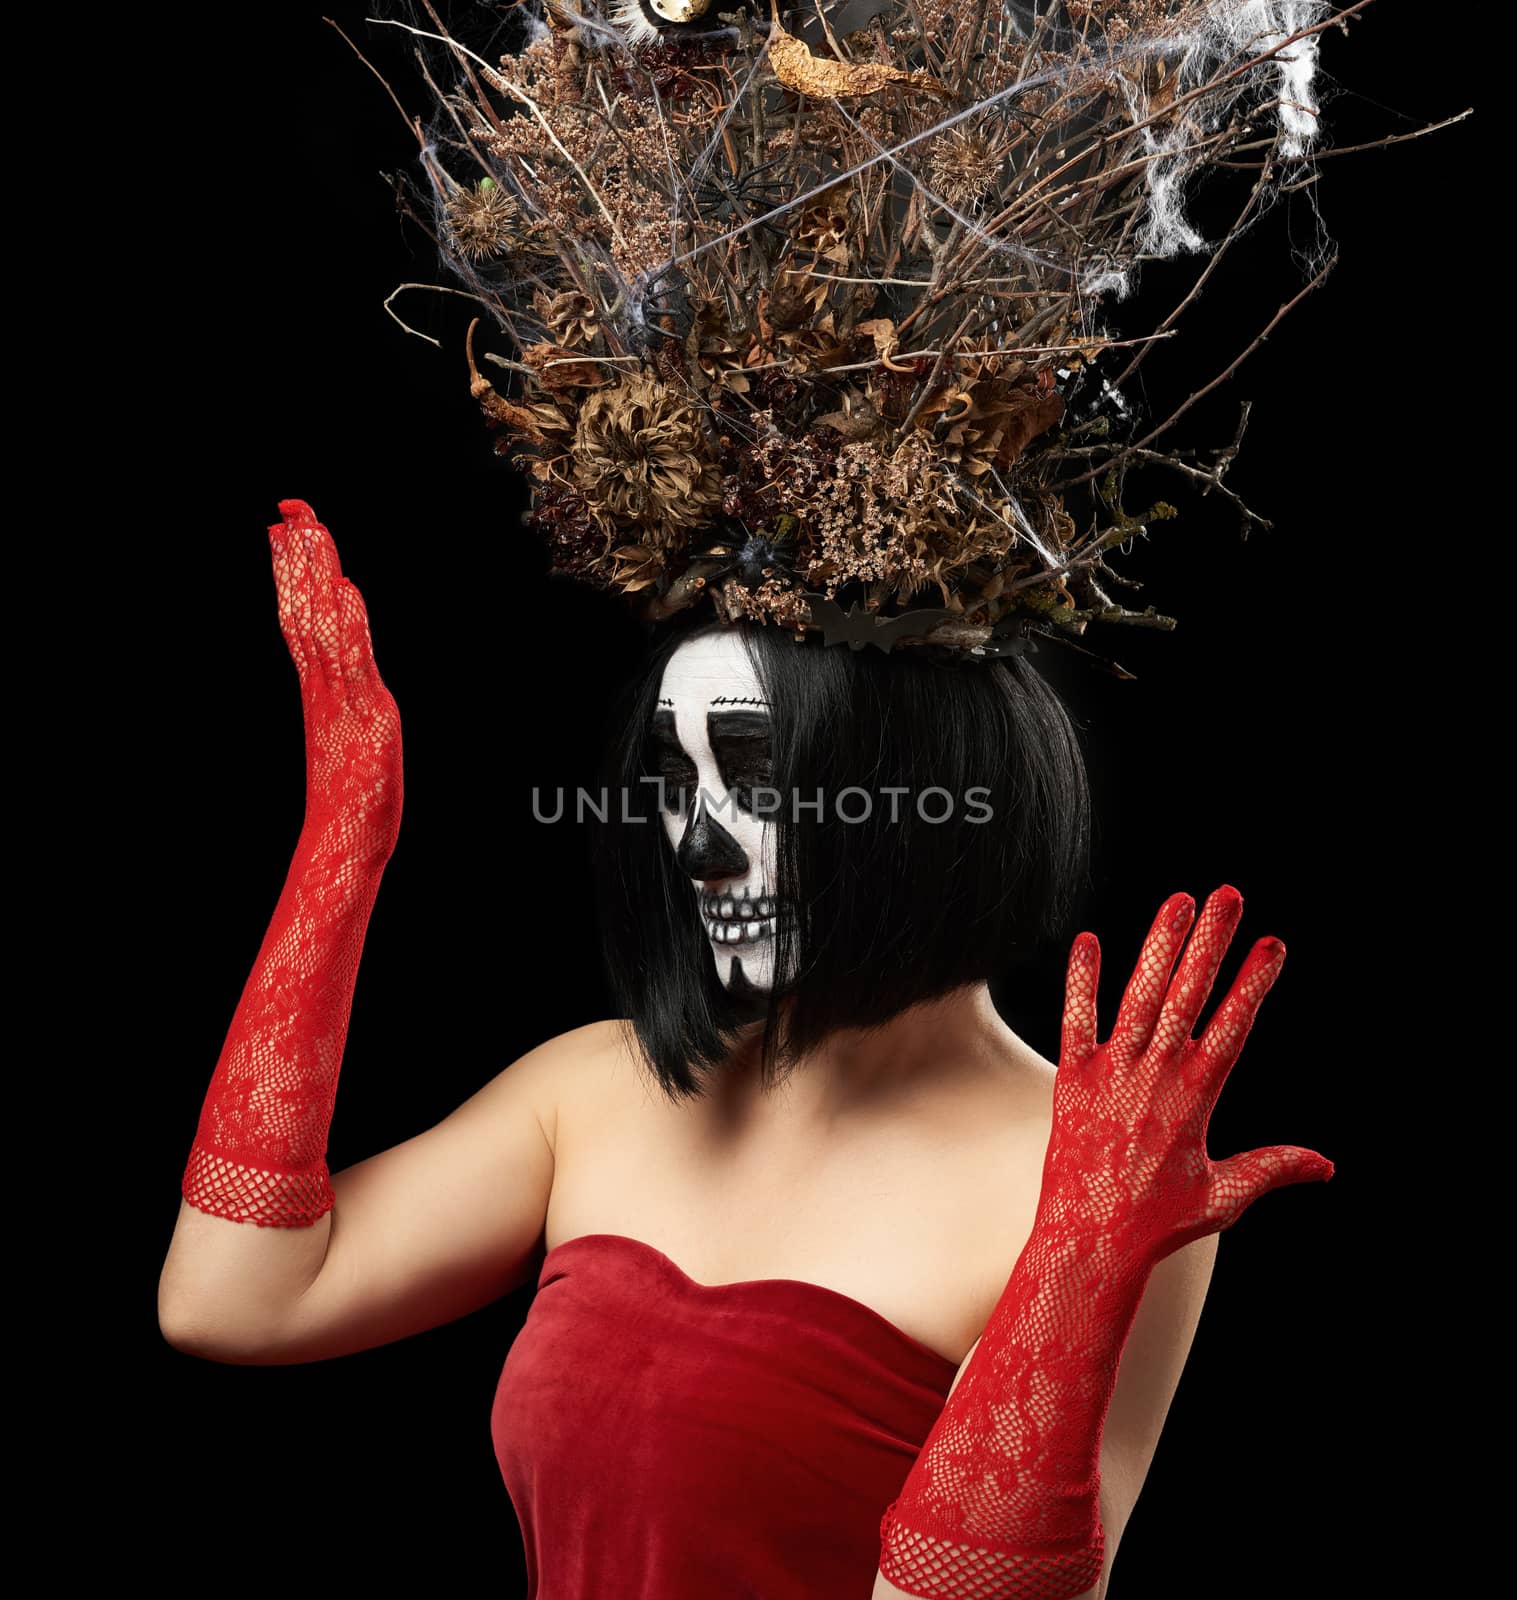 woman of Caucasian appearance with skeleton make-up stands in a red velor dress with a large crown of dry branches, black background